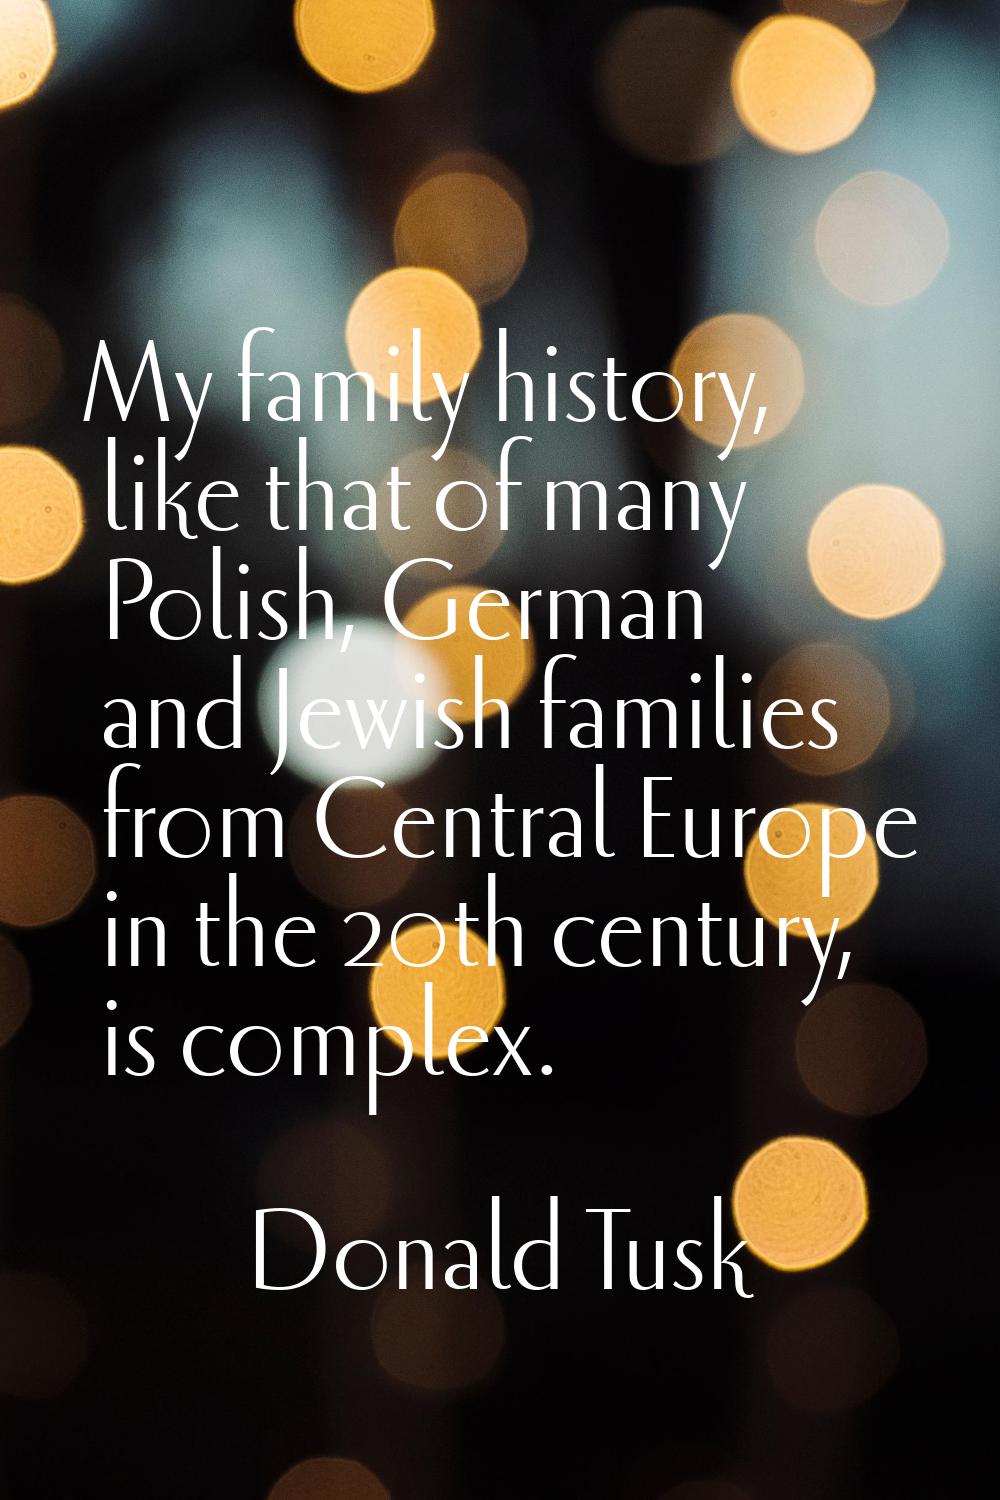 My family history, like that of many Polish, German and Jewish families from Central Europe in the 